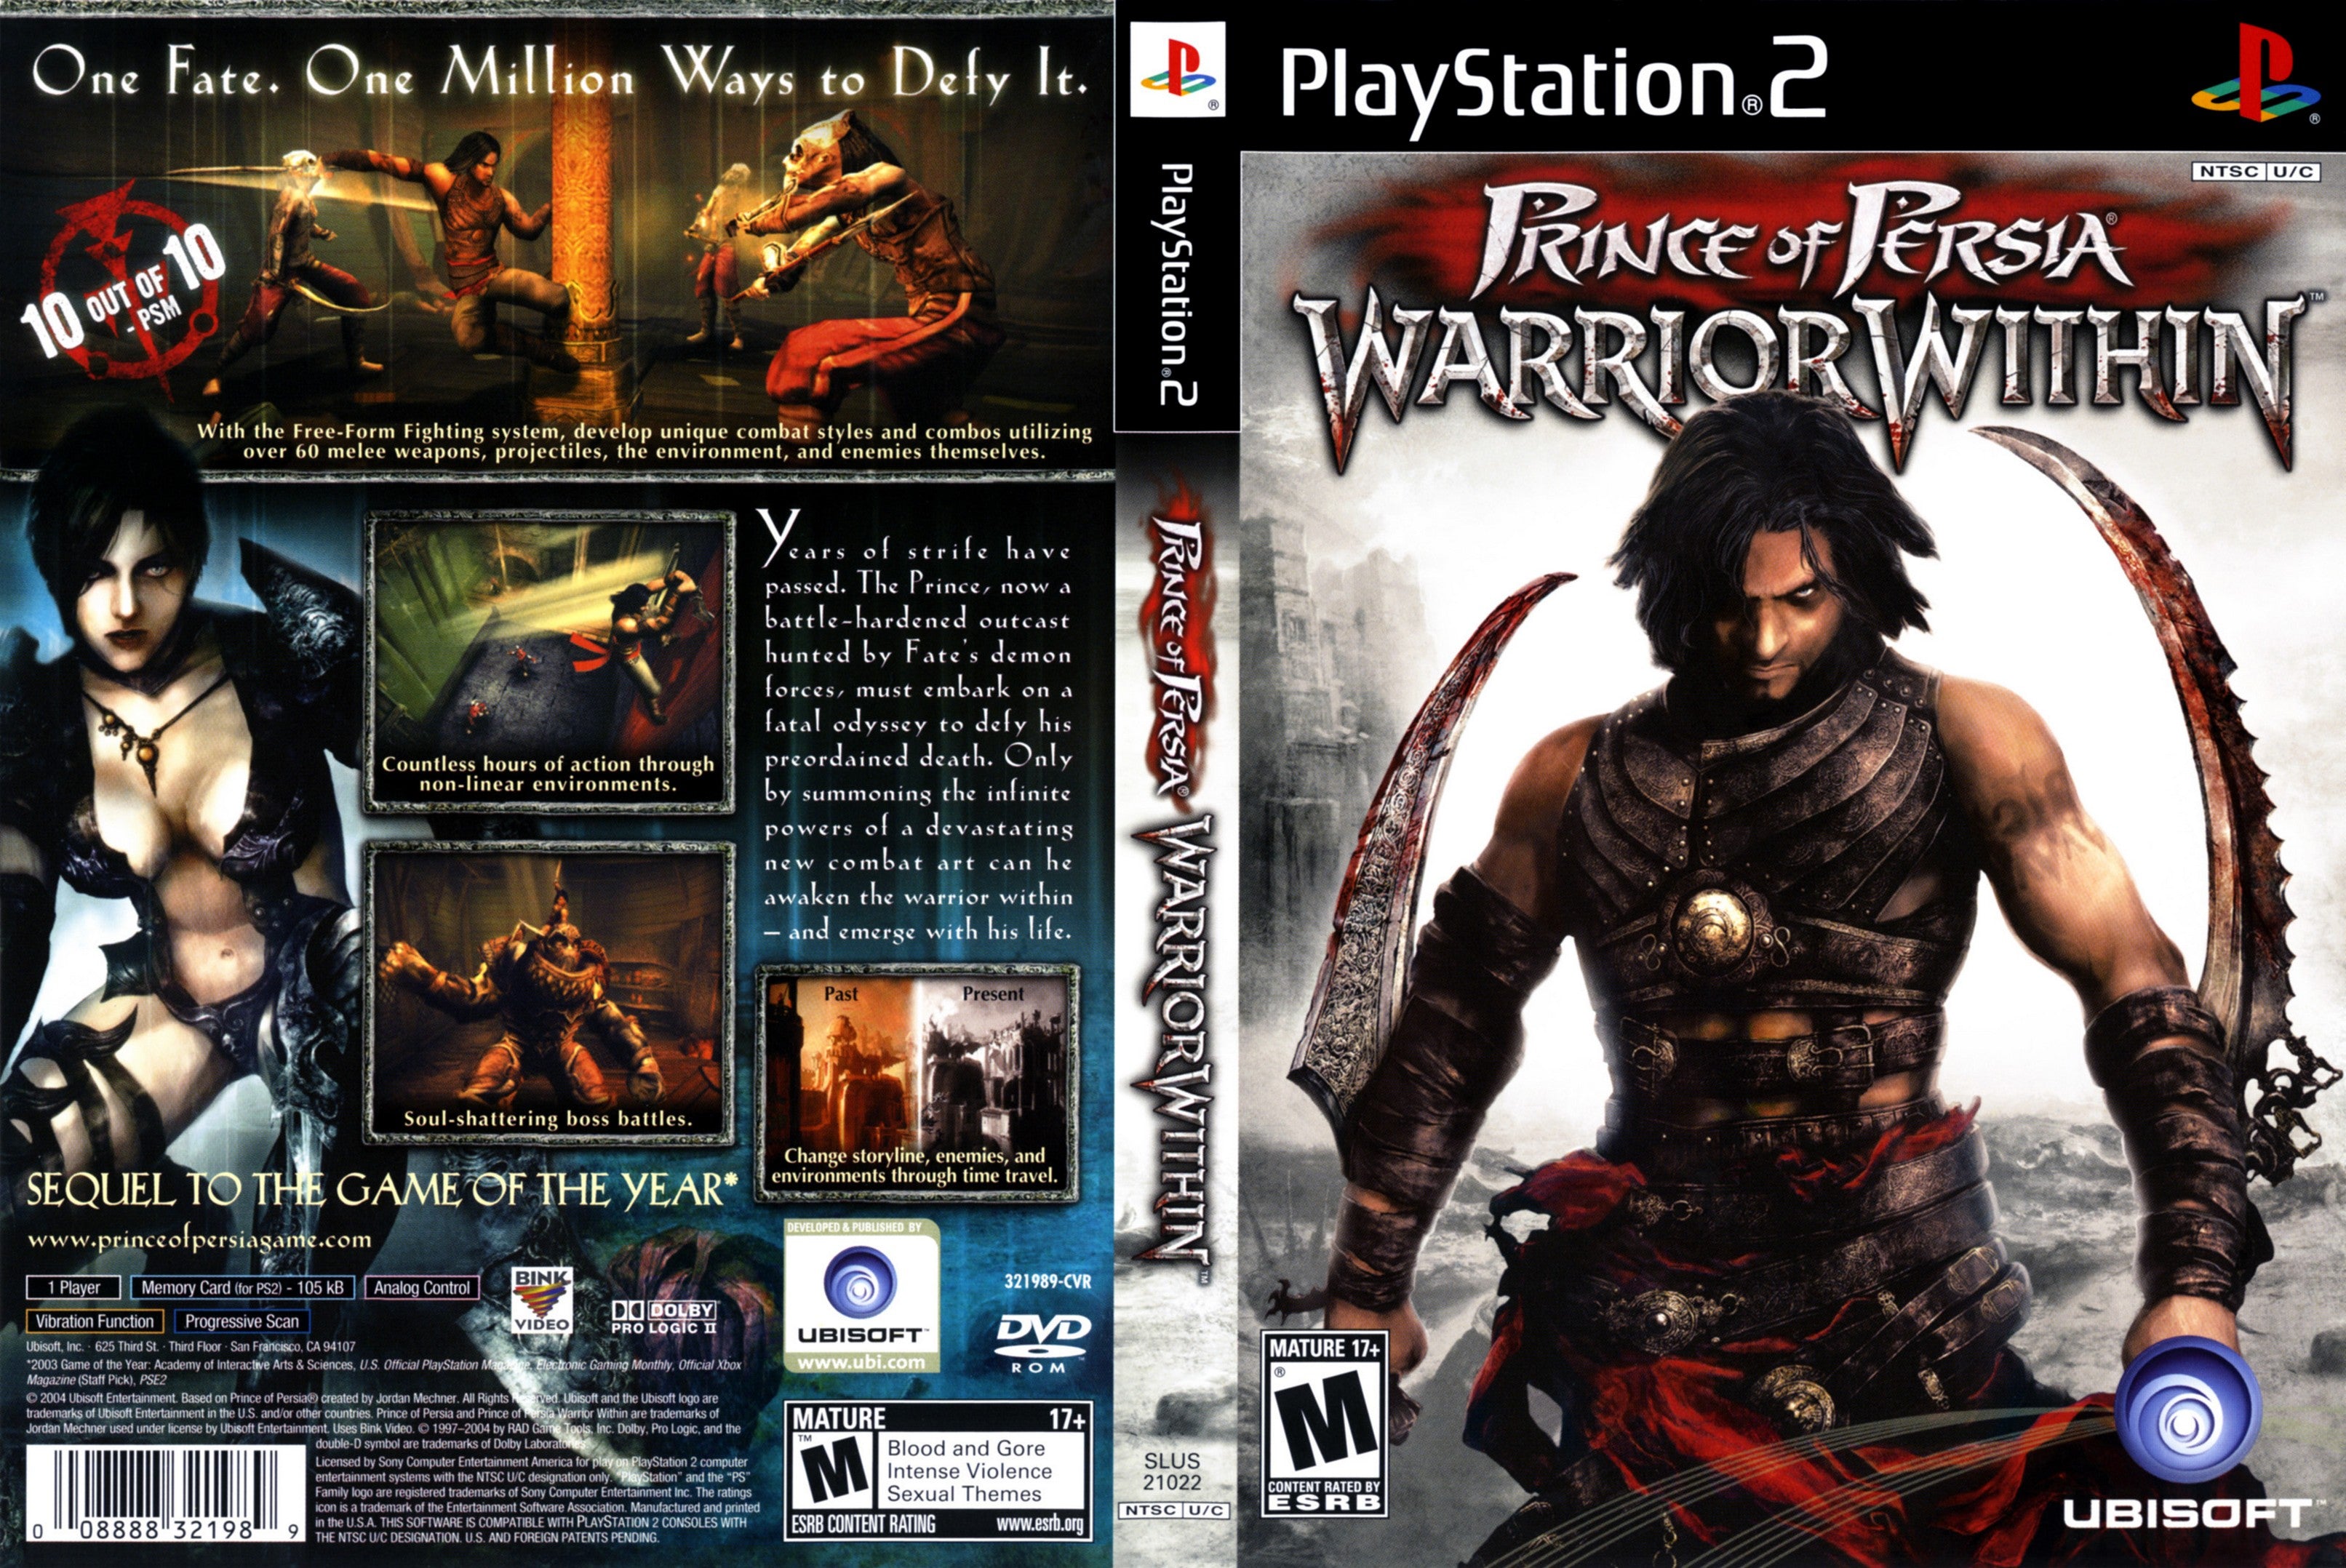 Prince of Persia: Warrior Within (Playstation 2) PS2 8888321989